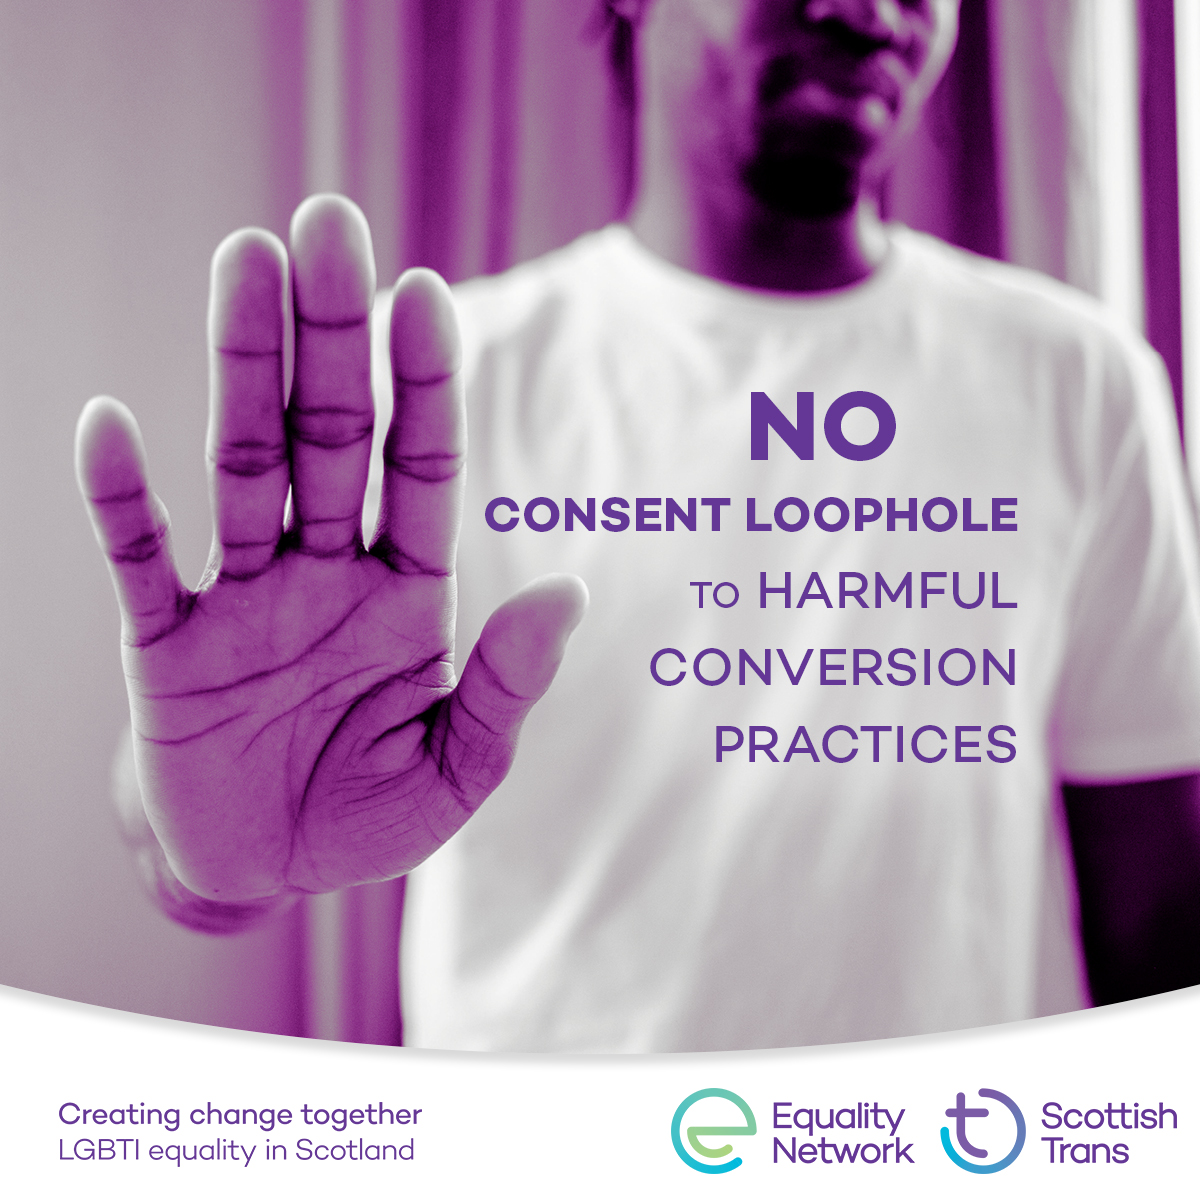 Conversion practices are done to LGBTQA+ people on the belief that we are wrong or need to be “fixed”. They can cause lifelong harm to those who are subjected to them. There must be no consent loophole in the law. Agree? Find out how to add your voice: equality-network.org/cp